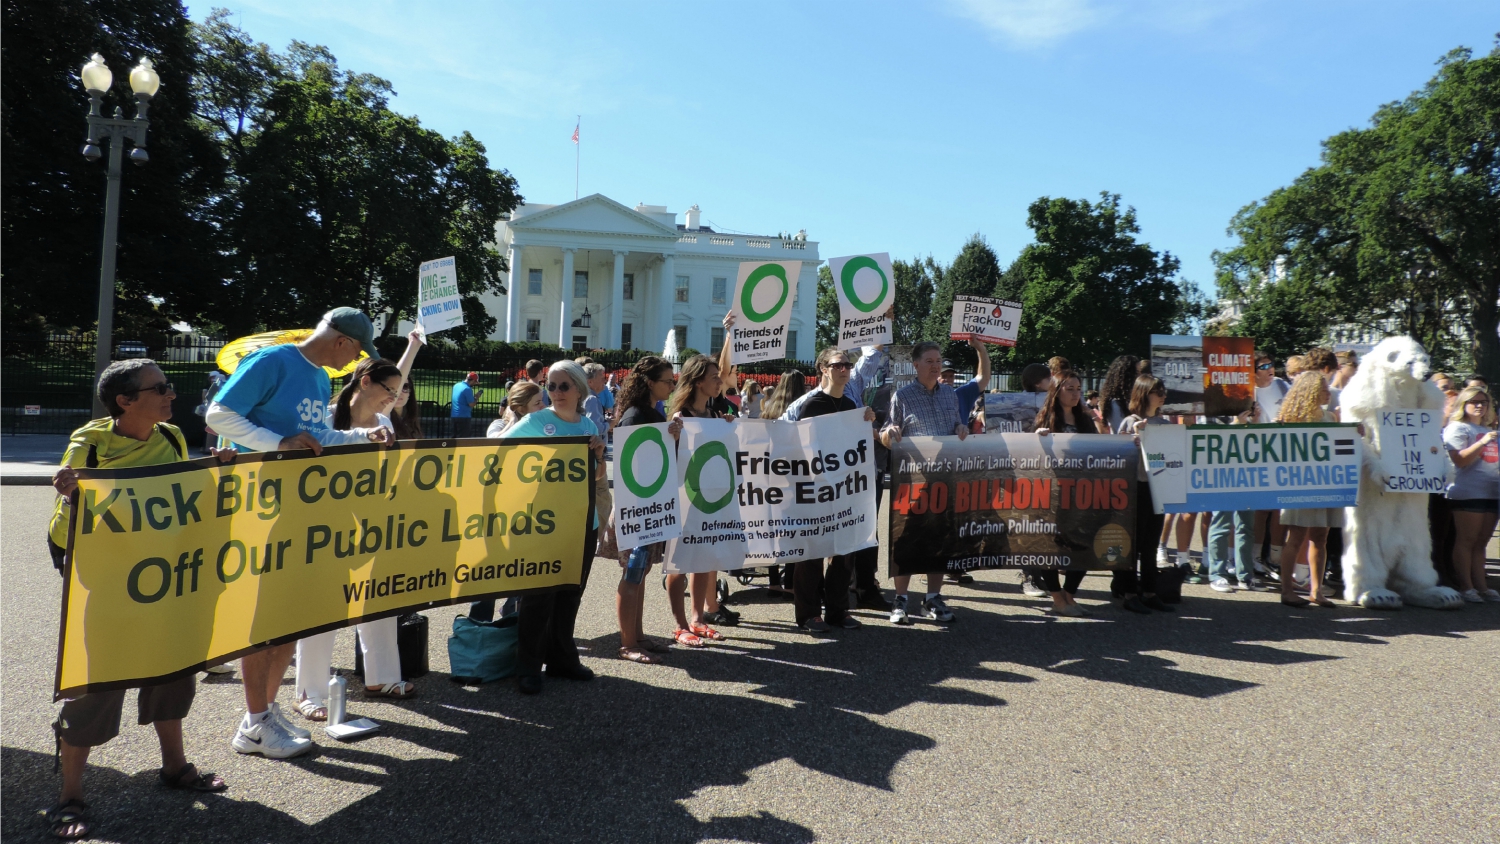 activists and banners in front of White House